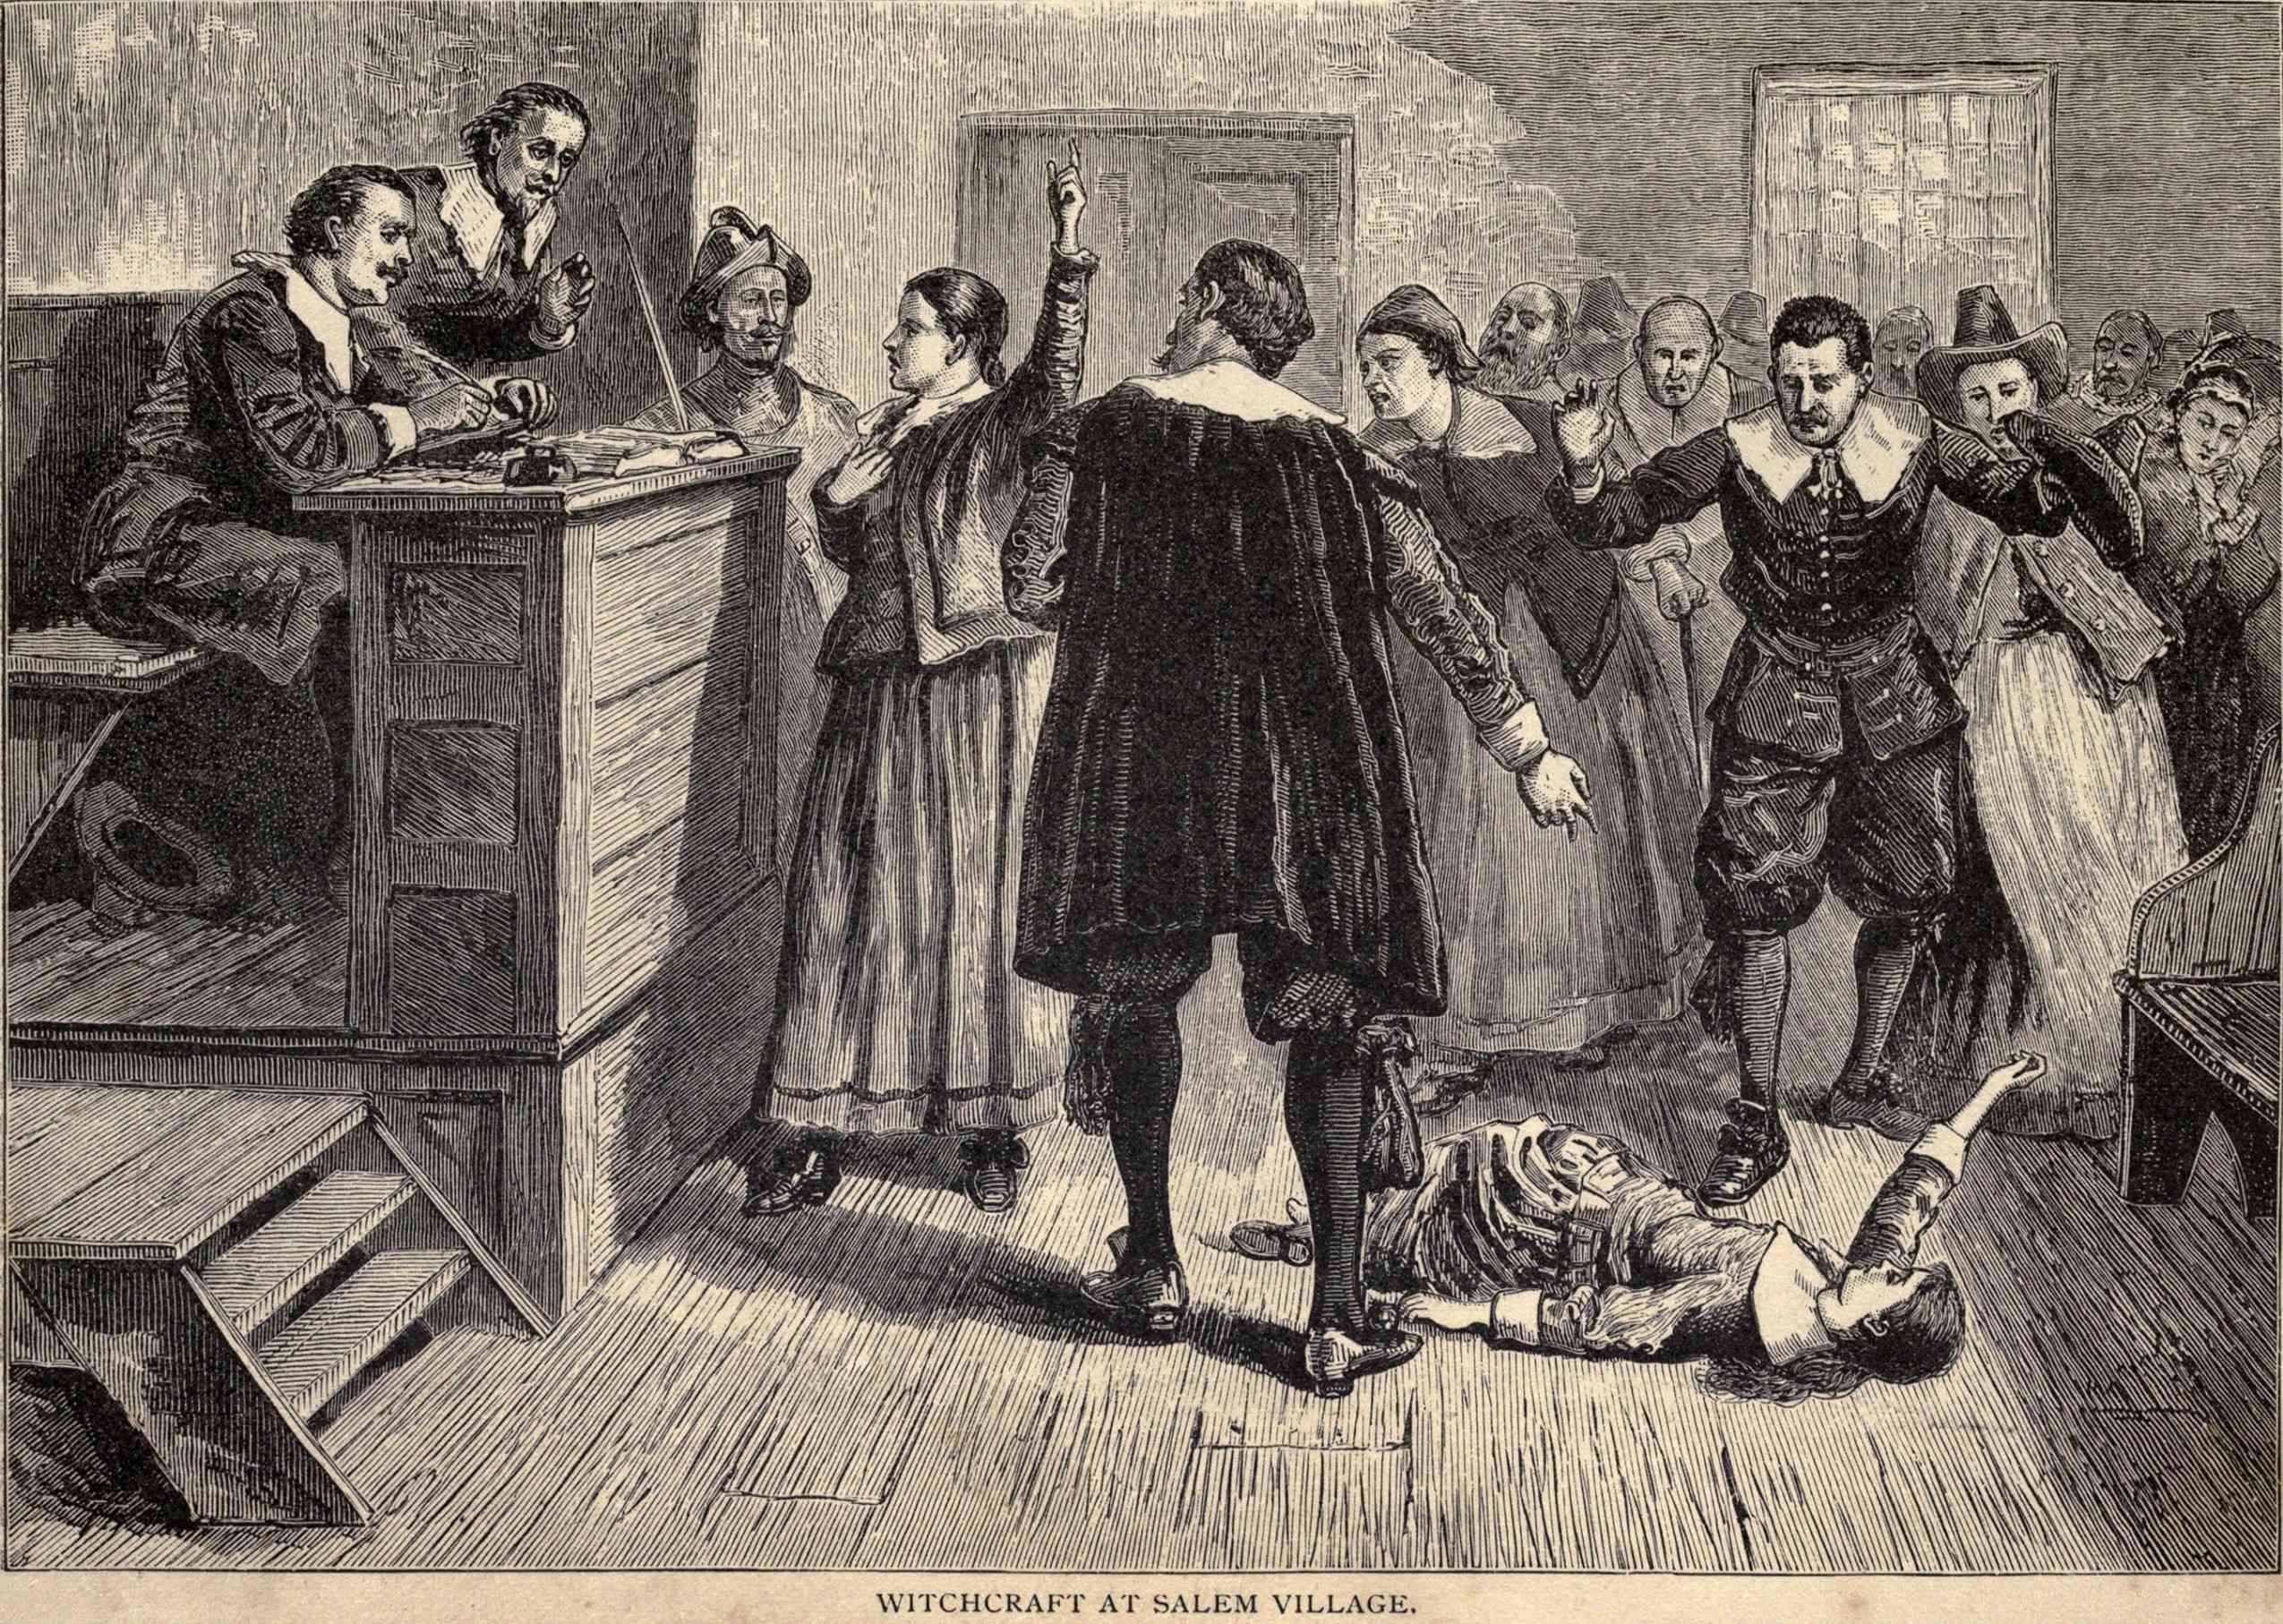 What caused the Salem witch trials?